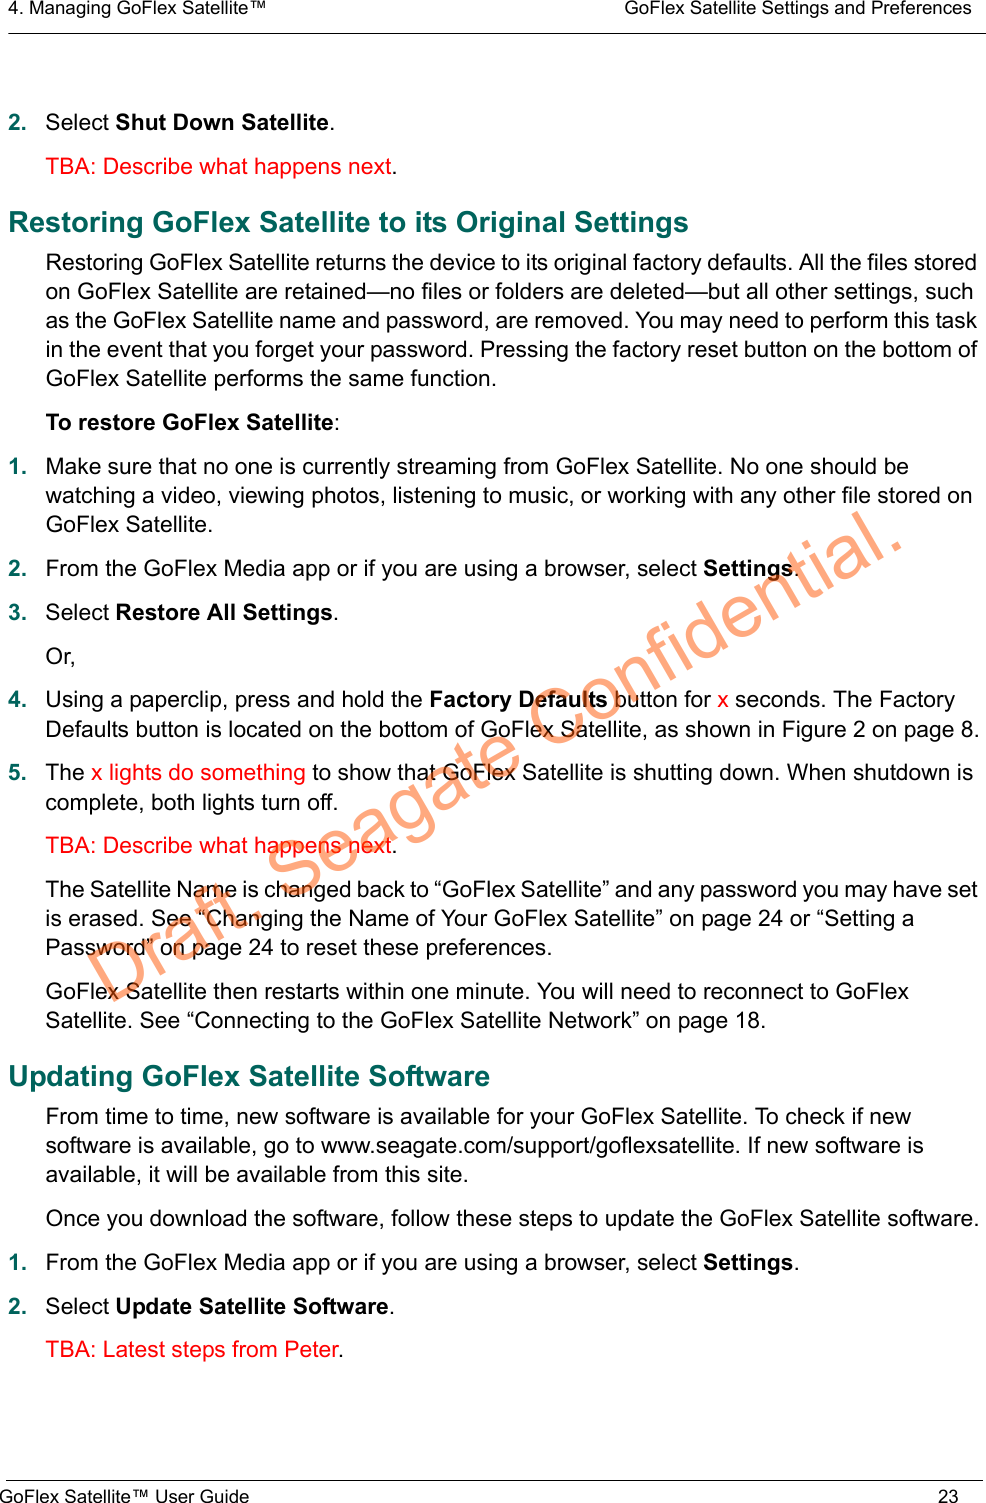 4. Managing GoFlex Satellite™  GoFlex Satellite Settings and PreferencesGoFlex Satellite™ User Guide 232. Select Shut Down Satellite.TBA: Describe what happens next.Restoring GoFlex Satellite to its Original SettingsRestoring GoFlex Satellite returns the device to its original factory defaults. All the files stored on GoFlex Satellite are retained—no files or folders are deleted—but all other settings, such as the GoFlex Satellite name and password, are removed. You may need to perform this task in the event that you forget your password. Pressing the factory reset button on the bottom of GoFlex Satellite performs the same function.To restore GoFlex Satellite:1. Make sure that no one is currently streaming from GoFlex Satellite. No one should be watching a video, viewing photos, listening to music, or working with any other file stored on GoFlex Satellite.2. From the GoFlex Media app or if you are using a browser, select Settings.3. Select Restore All Settings.Or,4. Using a paperclip, press and hold the Factory Defaults button for x seconds. The Factory Defaults button is located on the bottom of GoFlex Satellite, as shown in Figure 2 on page 8.5. The x lights do something to show that GoFlex Satellite is shutting down. When shutdown is complete, both lights turn off.TBA: Describe what happens next.The Satellite Name is changed back to “GoFlex Satellite” and any password you may have set is erased. See “Changing the Name of Your GoFlex Satellite” on page 24 or “Setting a Password” on page 24 to reset these preferences.GoFlex Satellite then restarts within one minute. You will need to reconnect to GoFlex Satellite. See “Connecting to the GoFlex Satellite Network” on page 18.Updating GoFlex Satellite SoftwareFrom time to time, new software is available for your GoFlex Satellite. To check if new software is available, go to www.seagate.com/support/goflexsatellite. If new software is available, it will be available from this site.Once you download the software, follow these steps to update the GoFlex Satellite software.1. From the GoFlex Media app or if you are using a browser, select Settings.2. Select Update Satellite Software.TBA: Latest steps from Peter.Draft. Seagate Confidential.